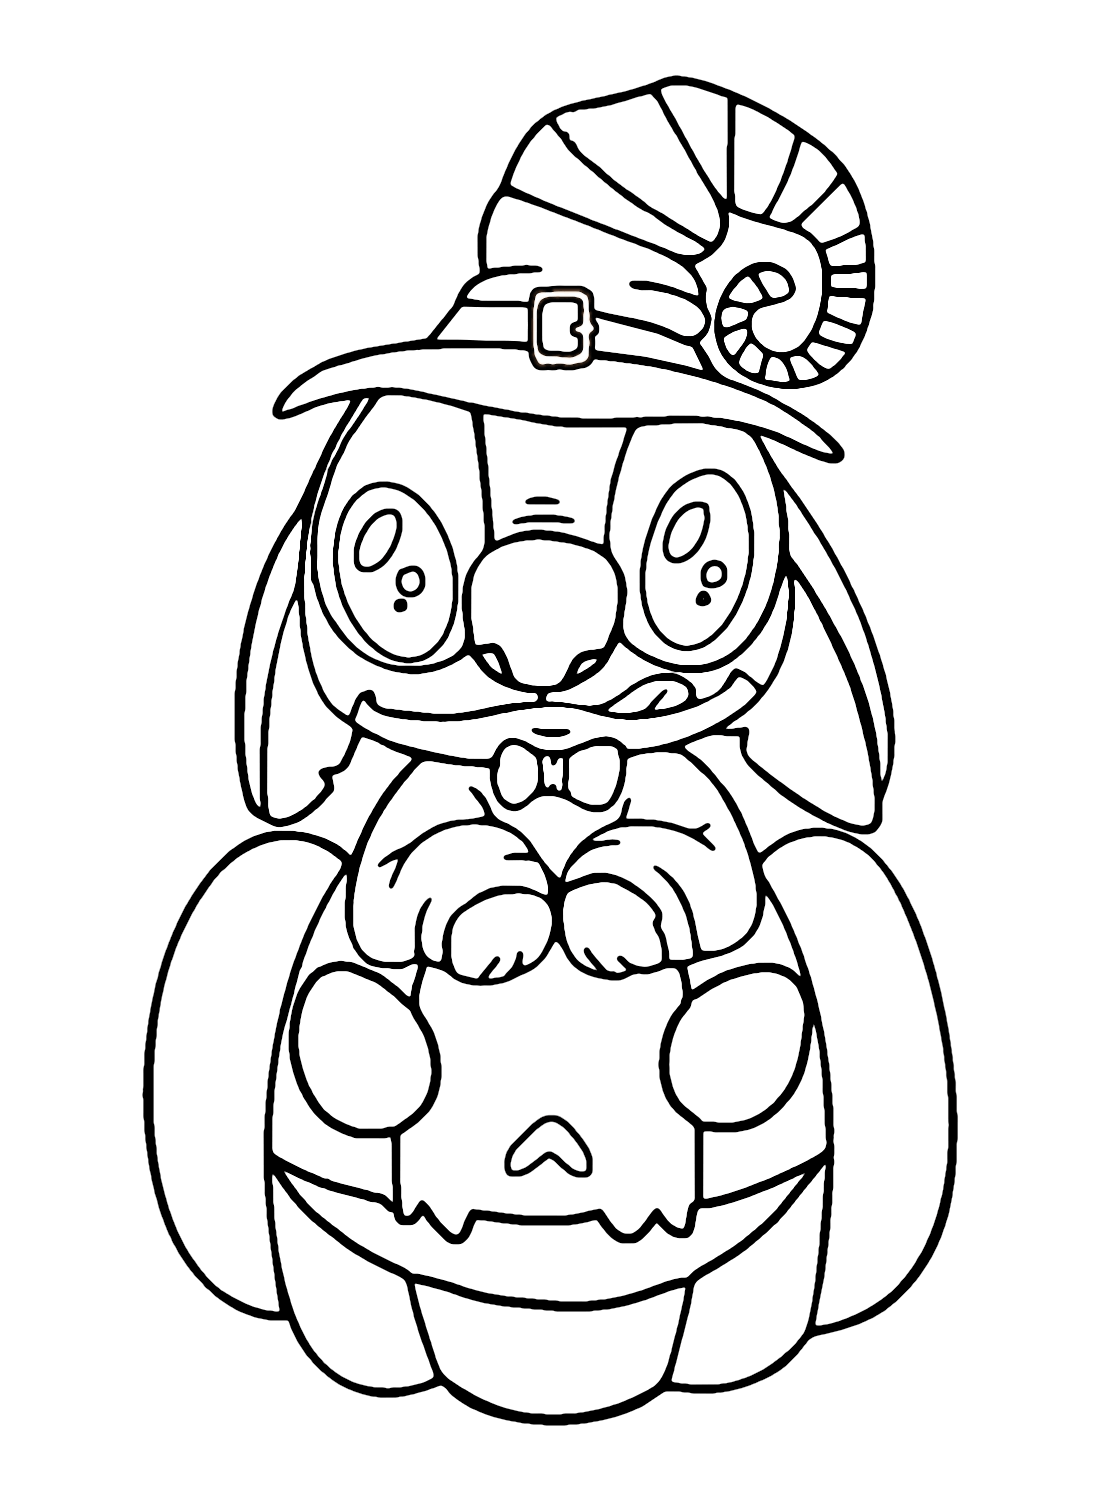 Stitch Halloween Coloring Pages Coloring Page